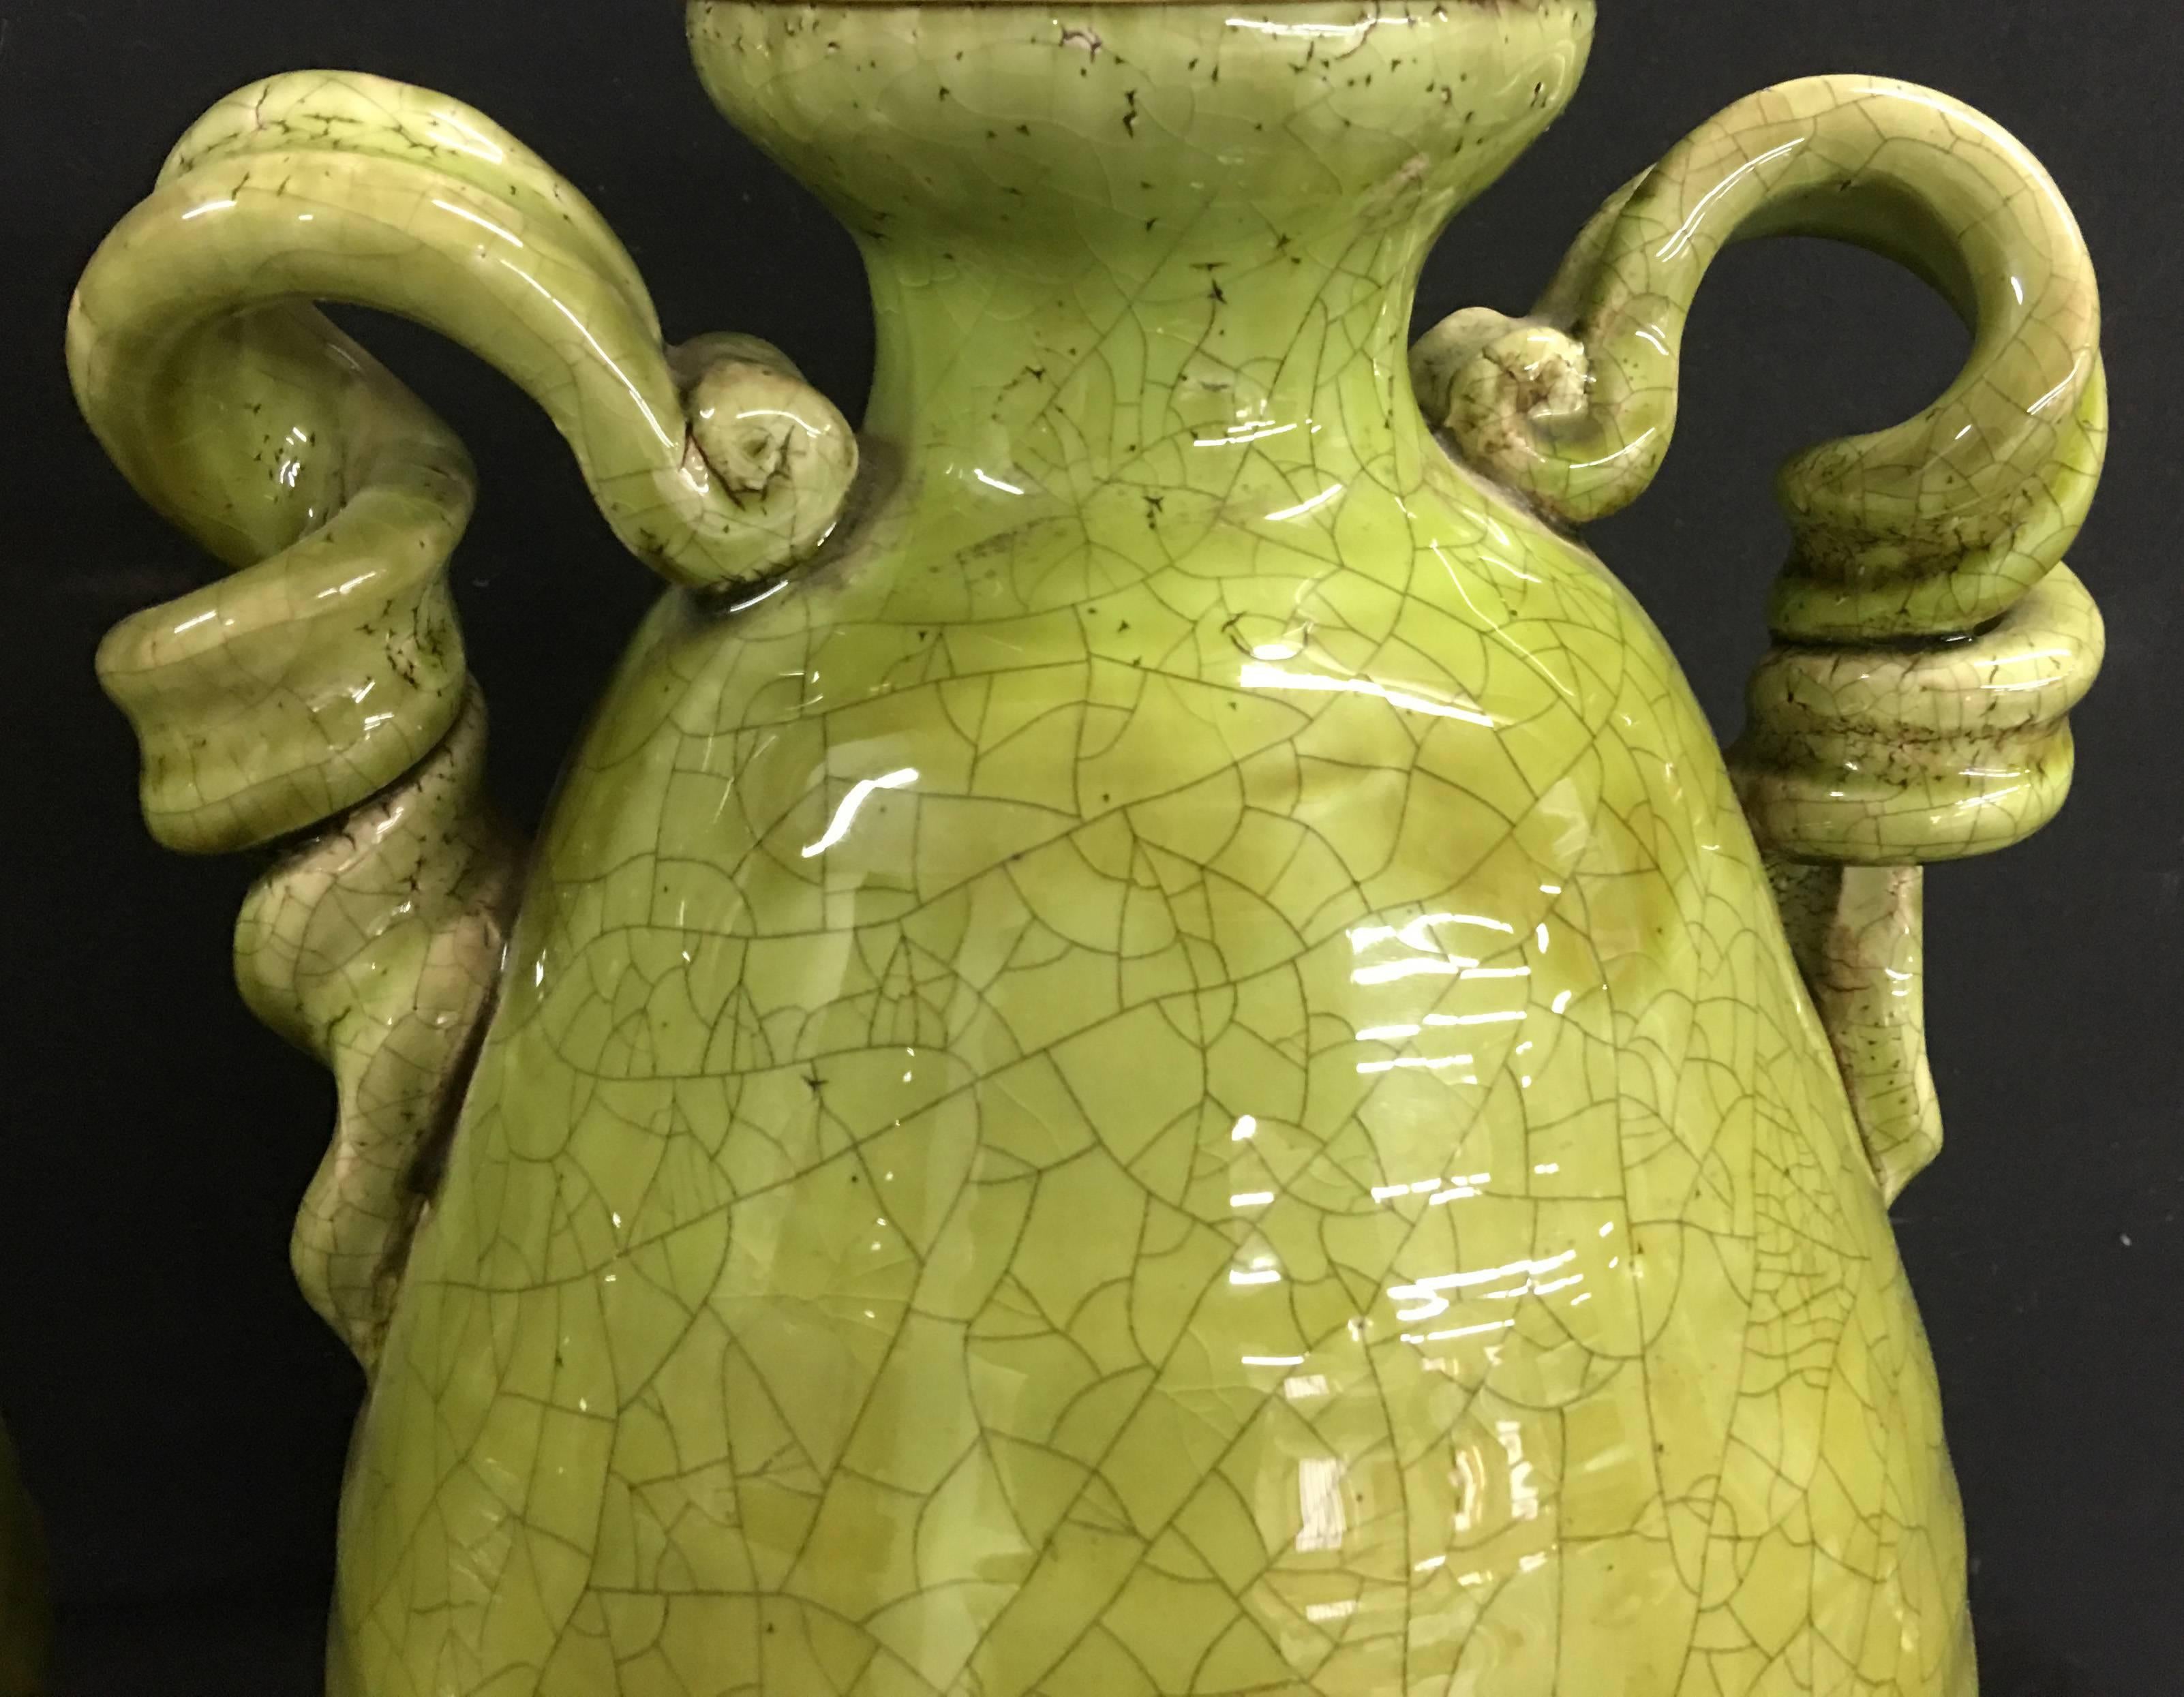 Unusual pair of apple green crackle glazed urns with lamp application. The lamps are newly wired. The hardware is brushed brass with Dual sockets and individually controlled pulls. The vessels are 14" in height, the shade post is 26" with